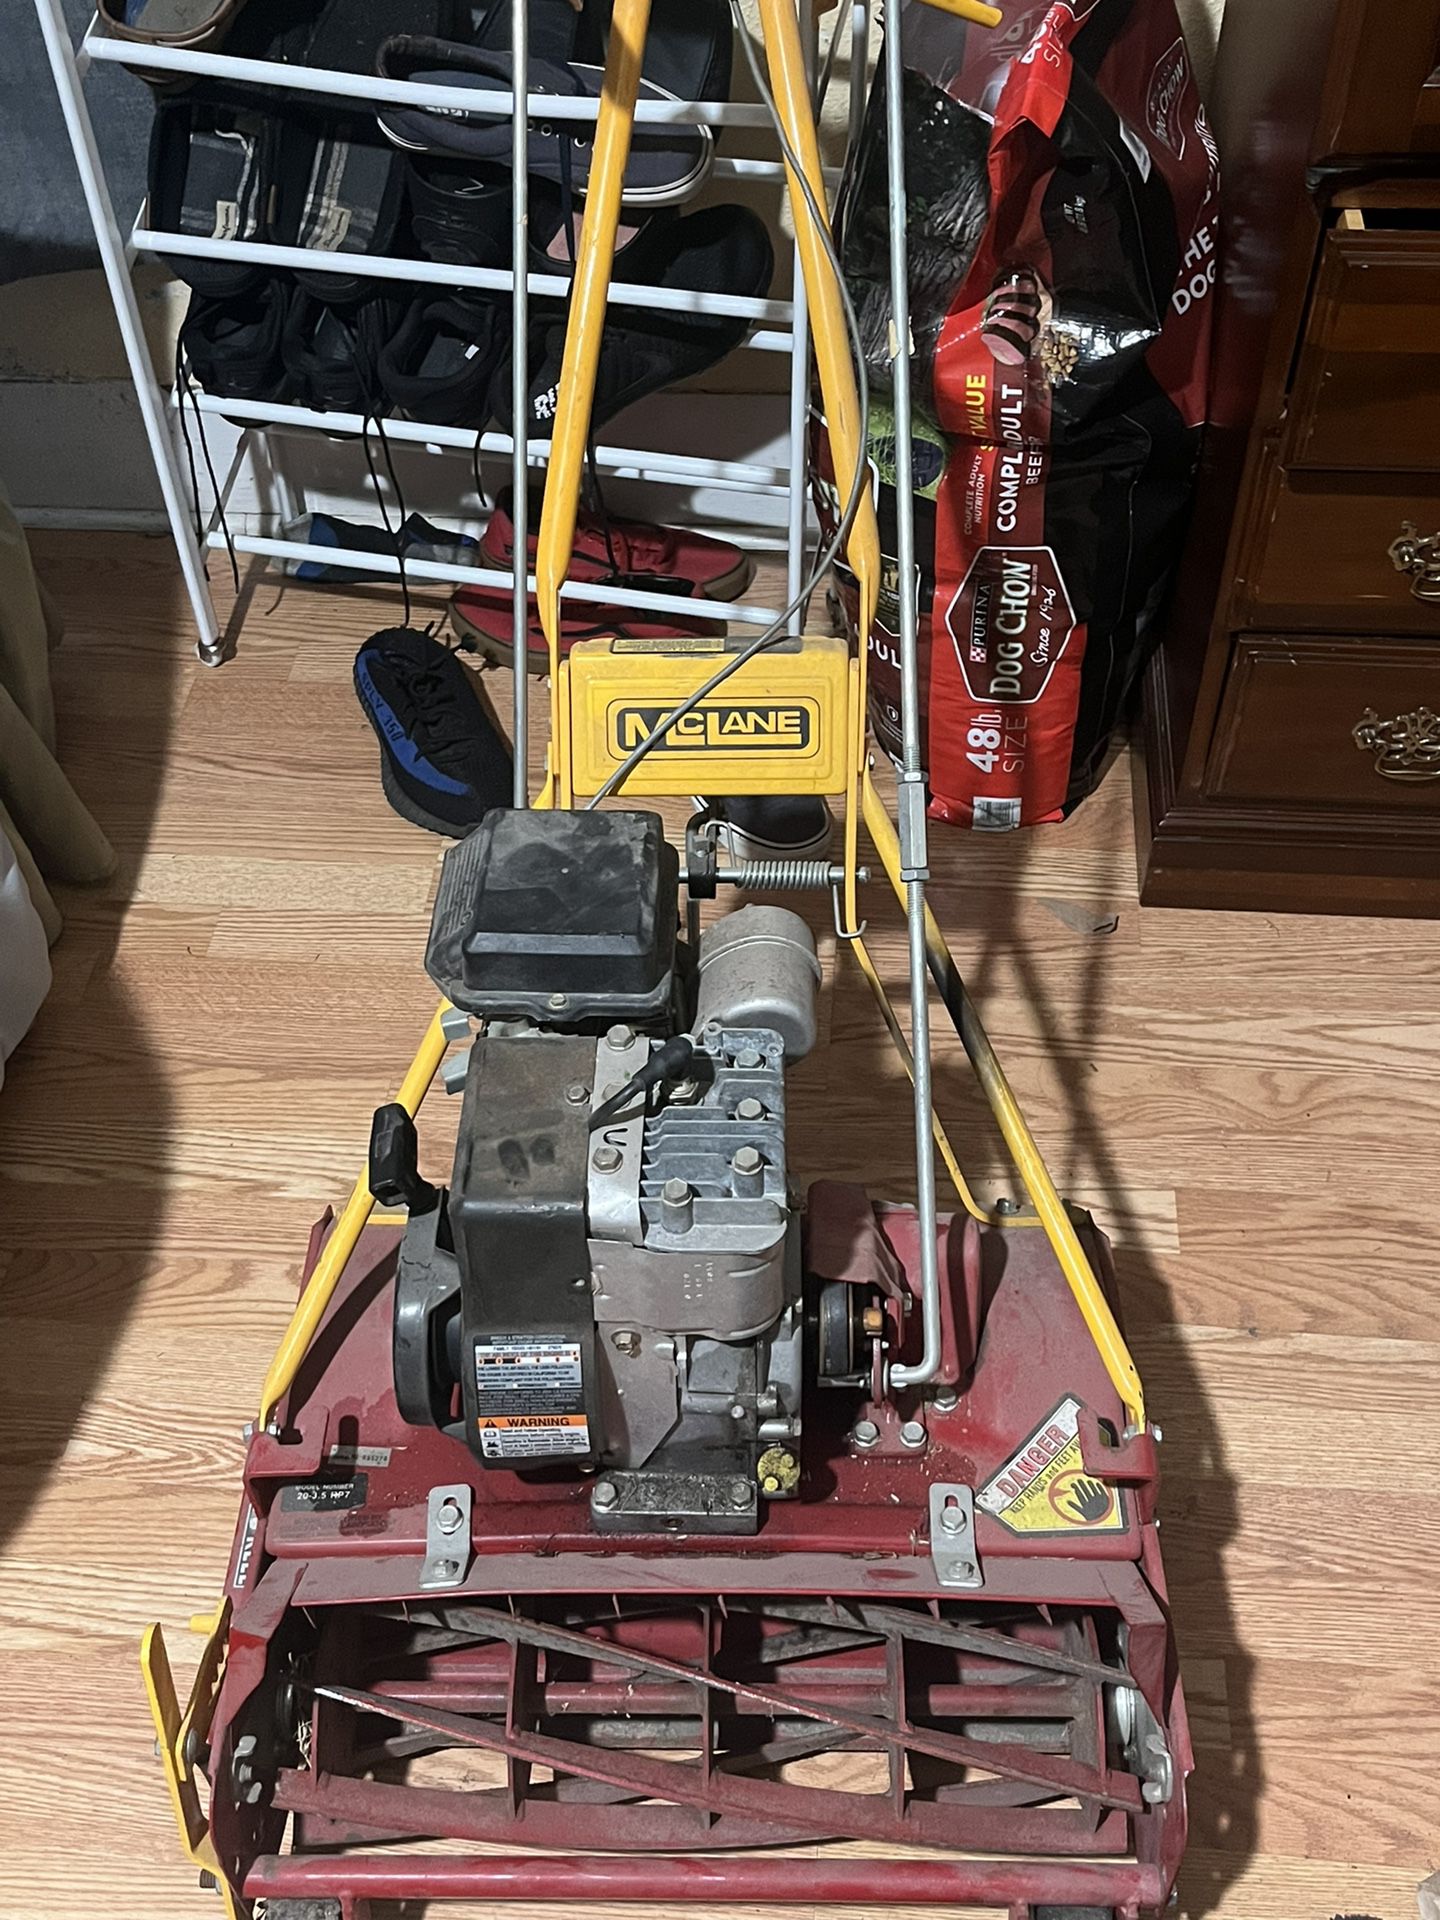 McLane Reel Mower for Sale in Fort Worth, TX - OfferUp